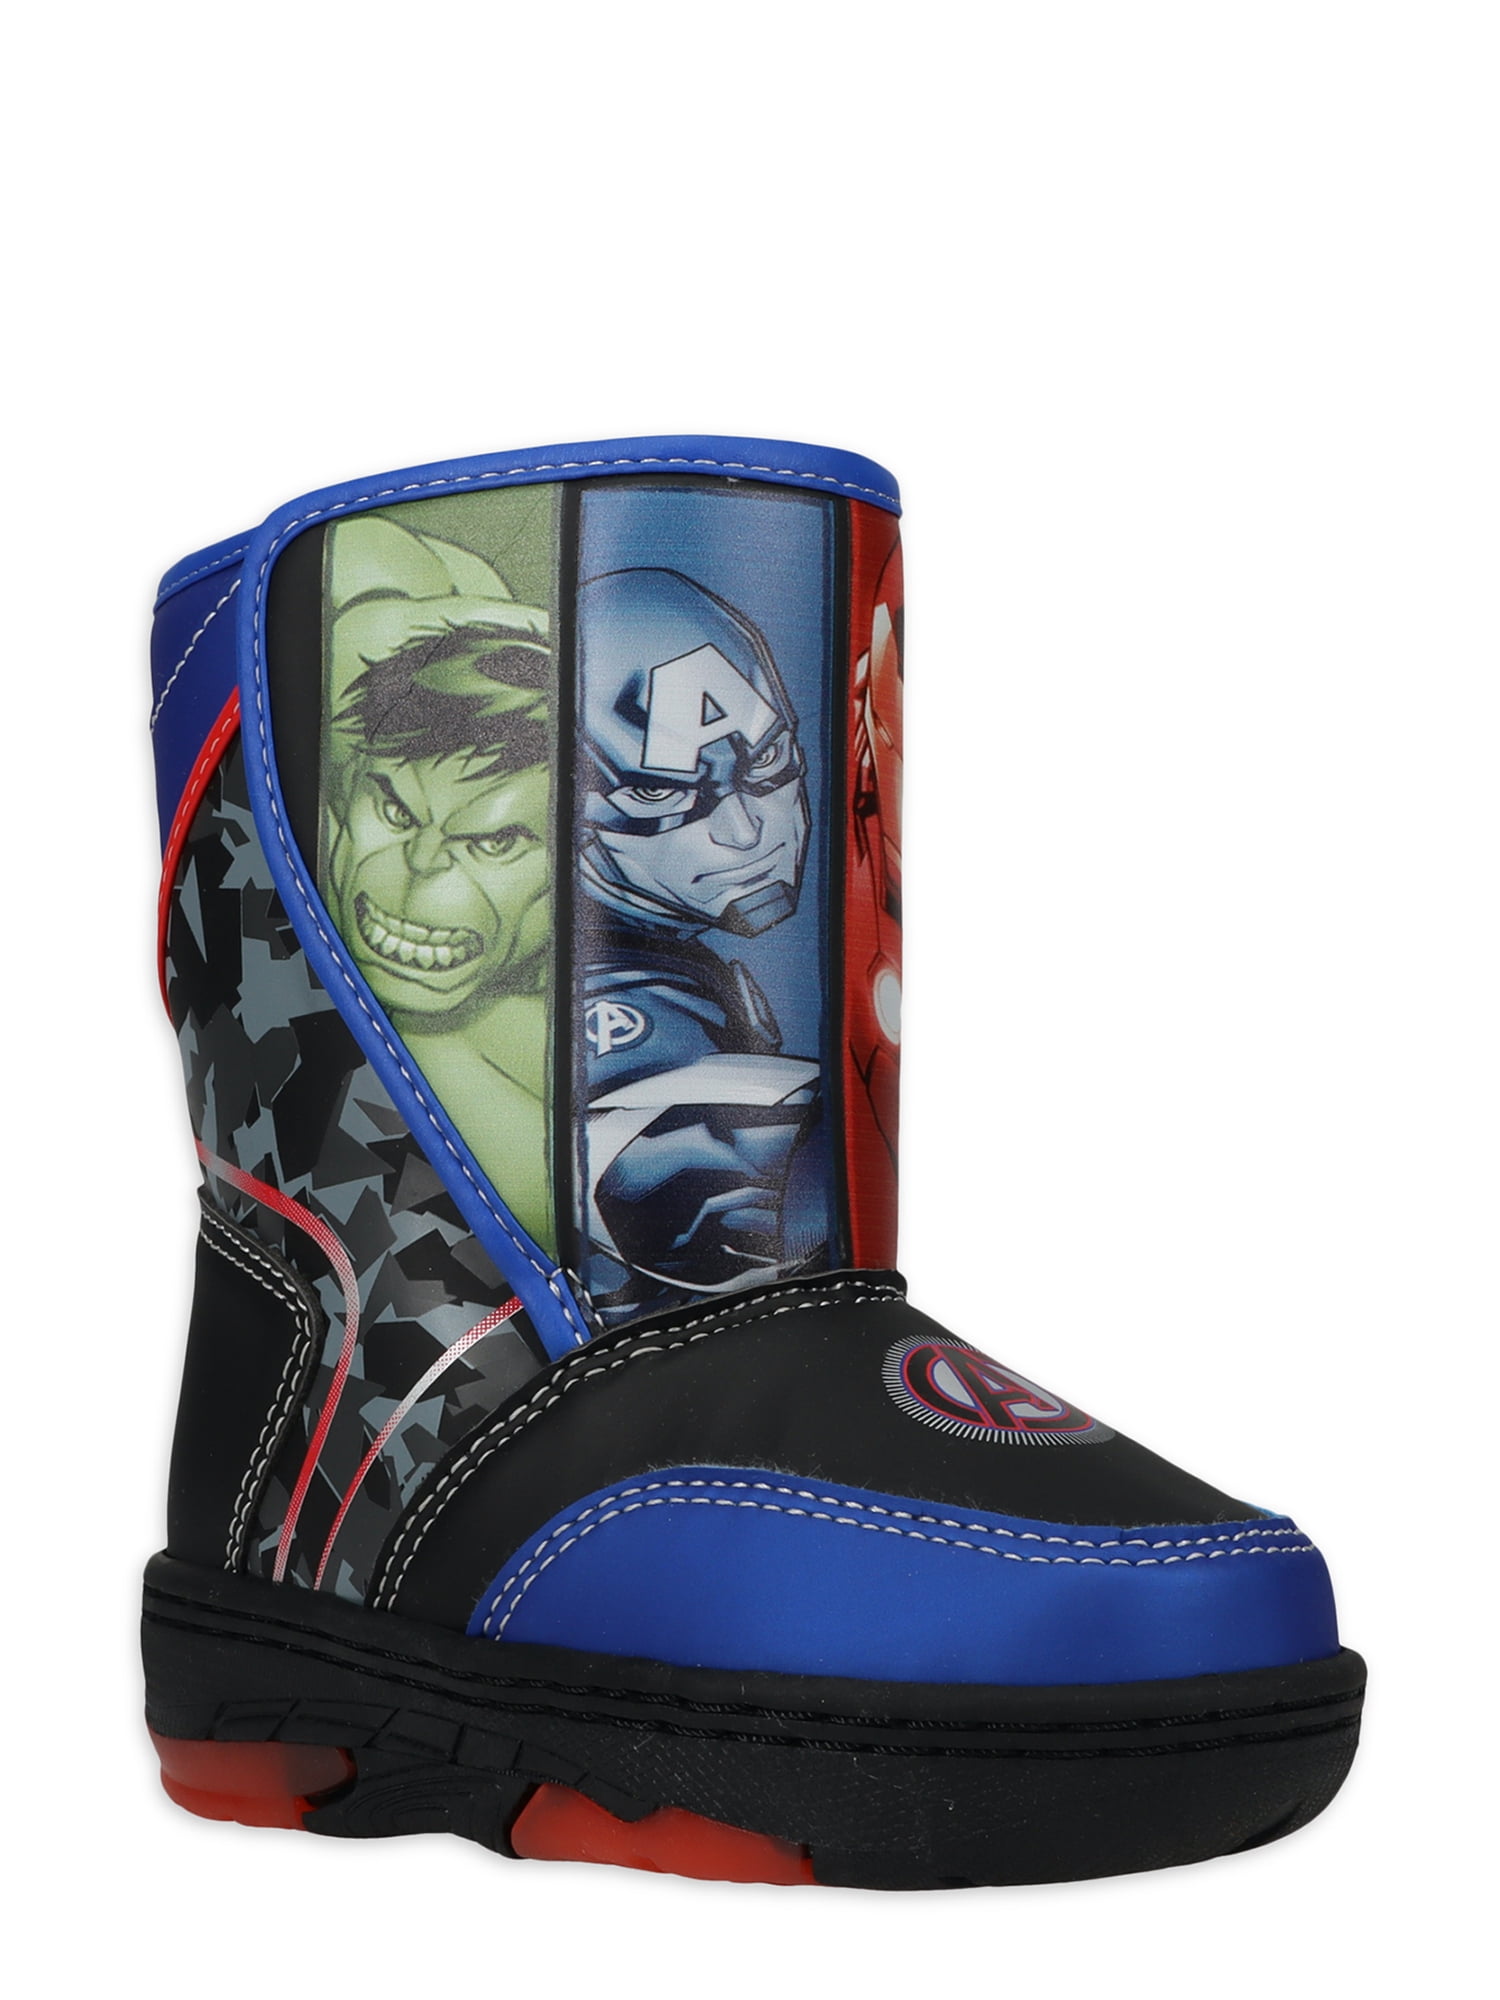 Marvel Comics Ultimate Spider-Man Boy's Youth Warm Winter Boots Size 12 NWT 